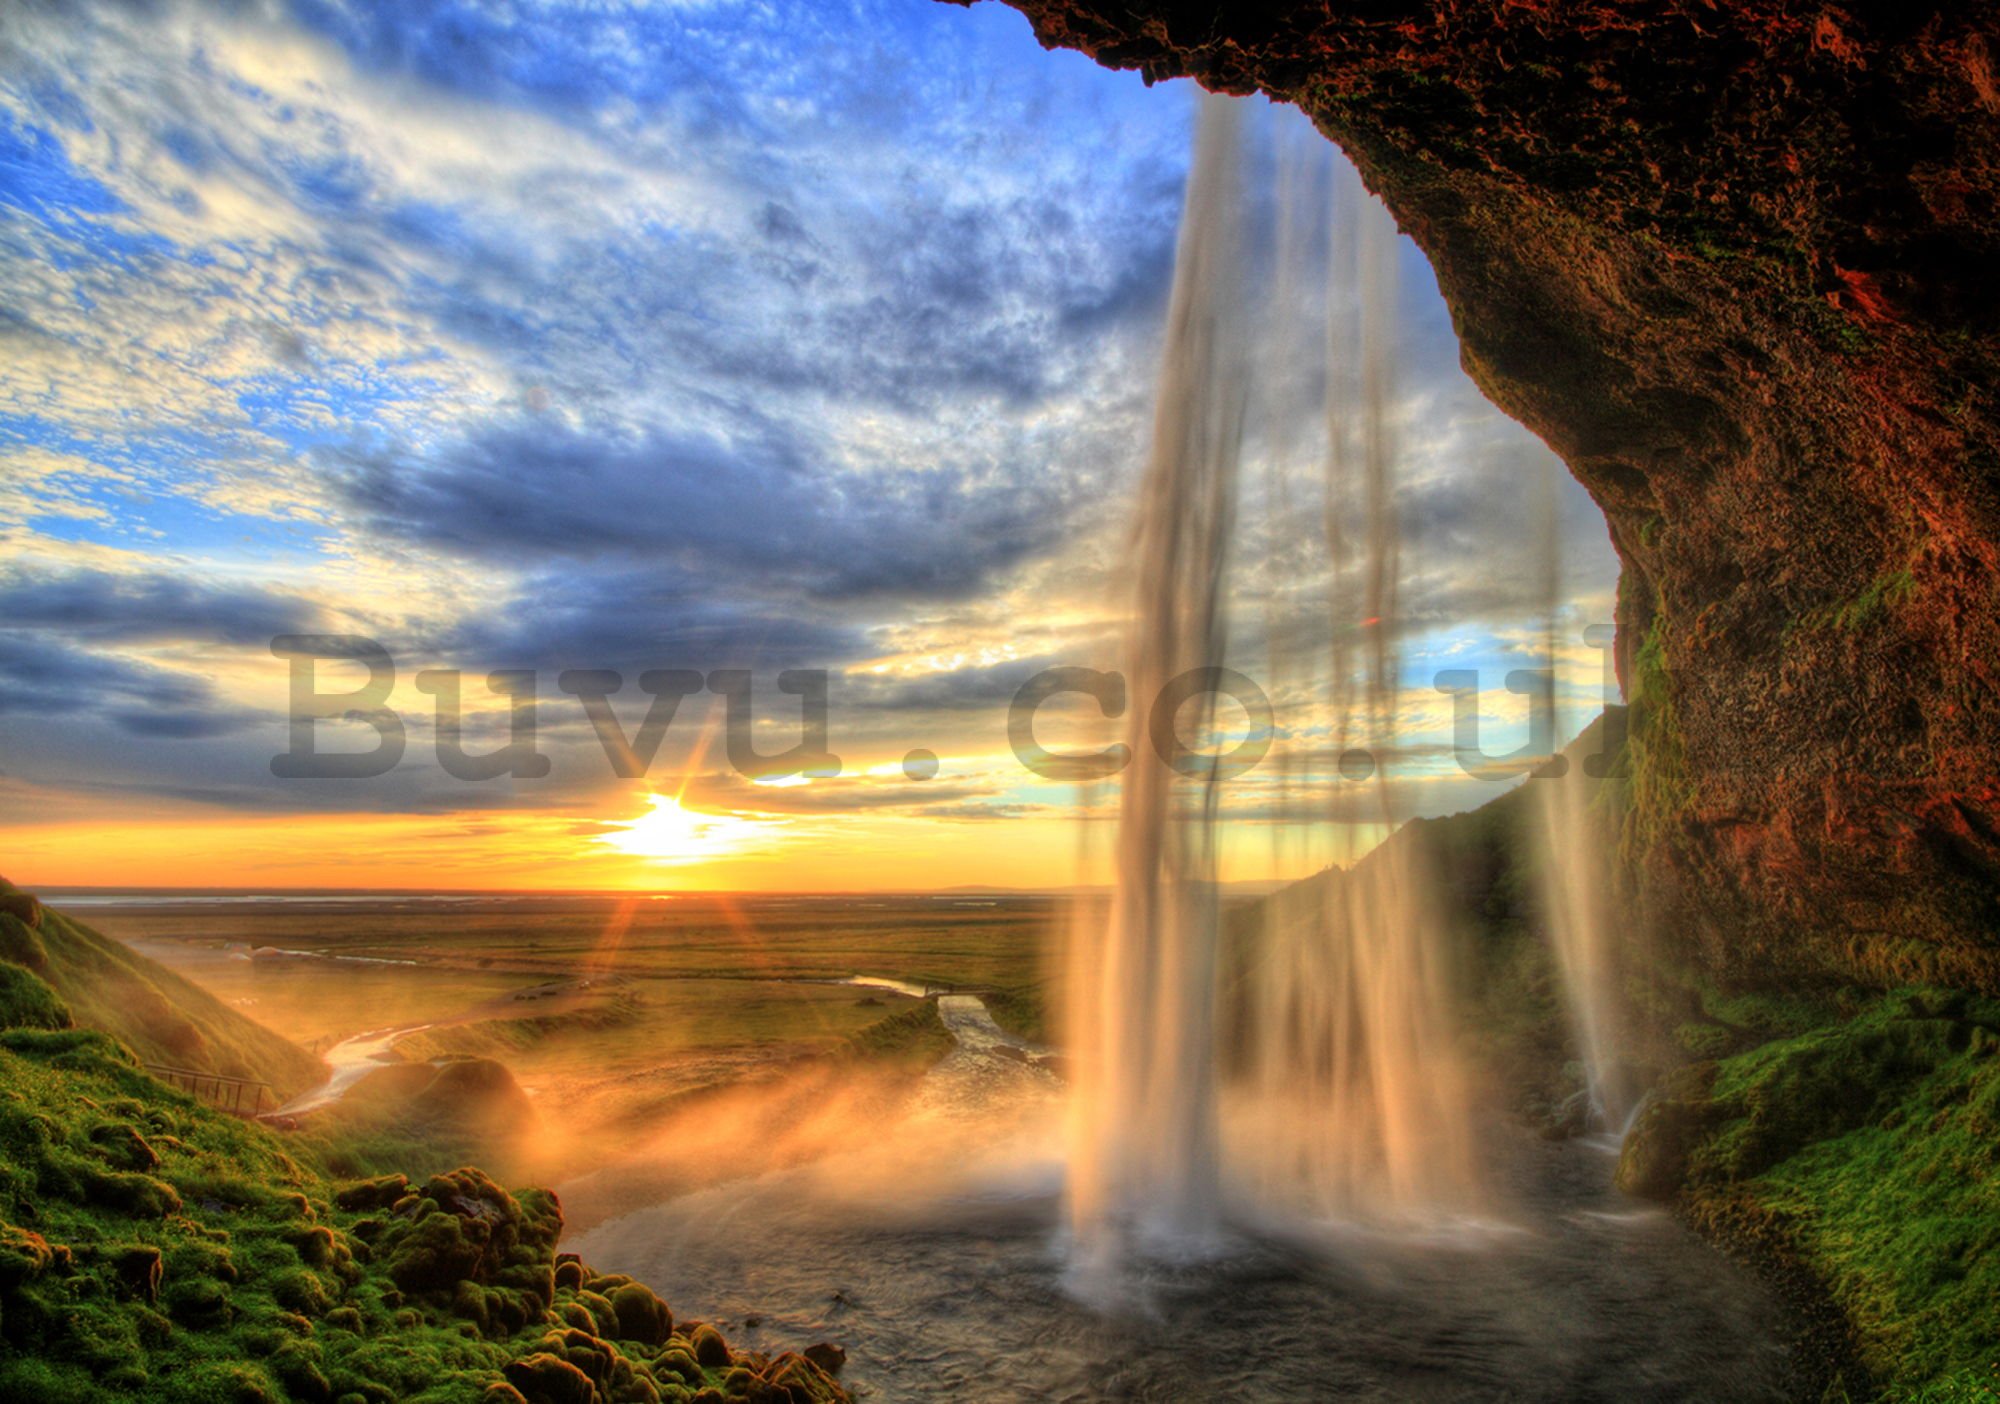 Wall mural: Waterfall at sunset - 184x254 cm